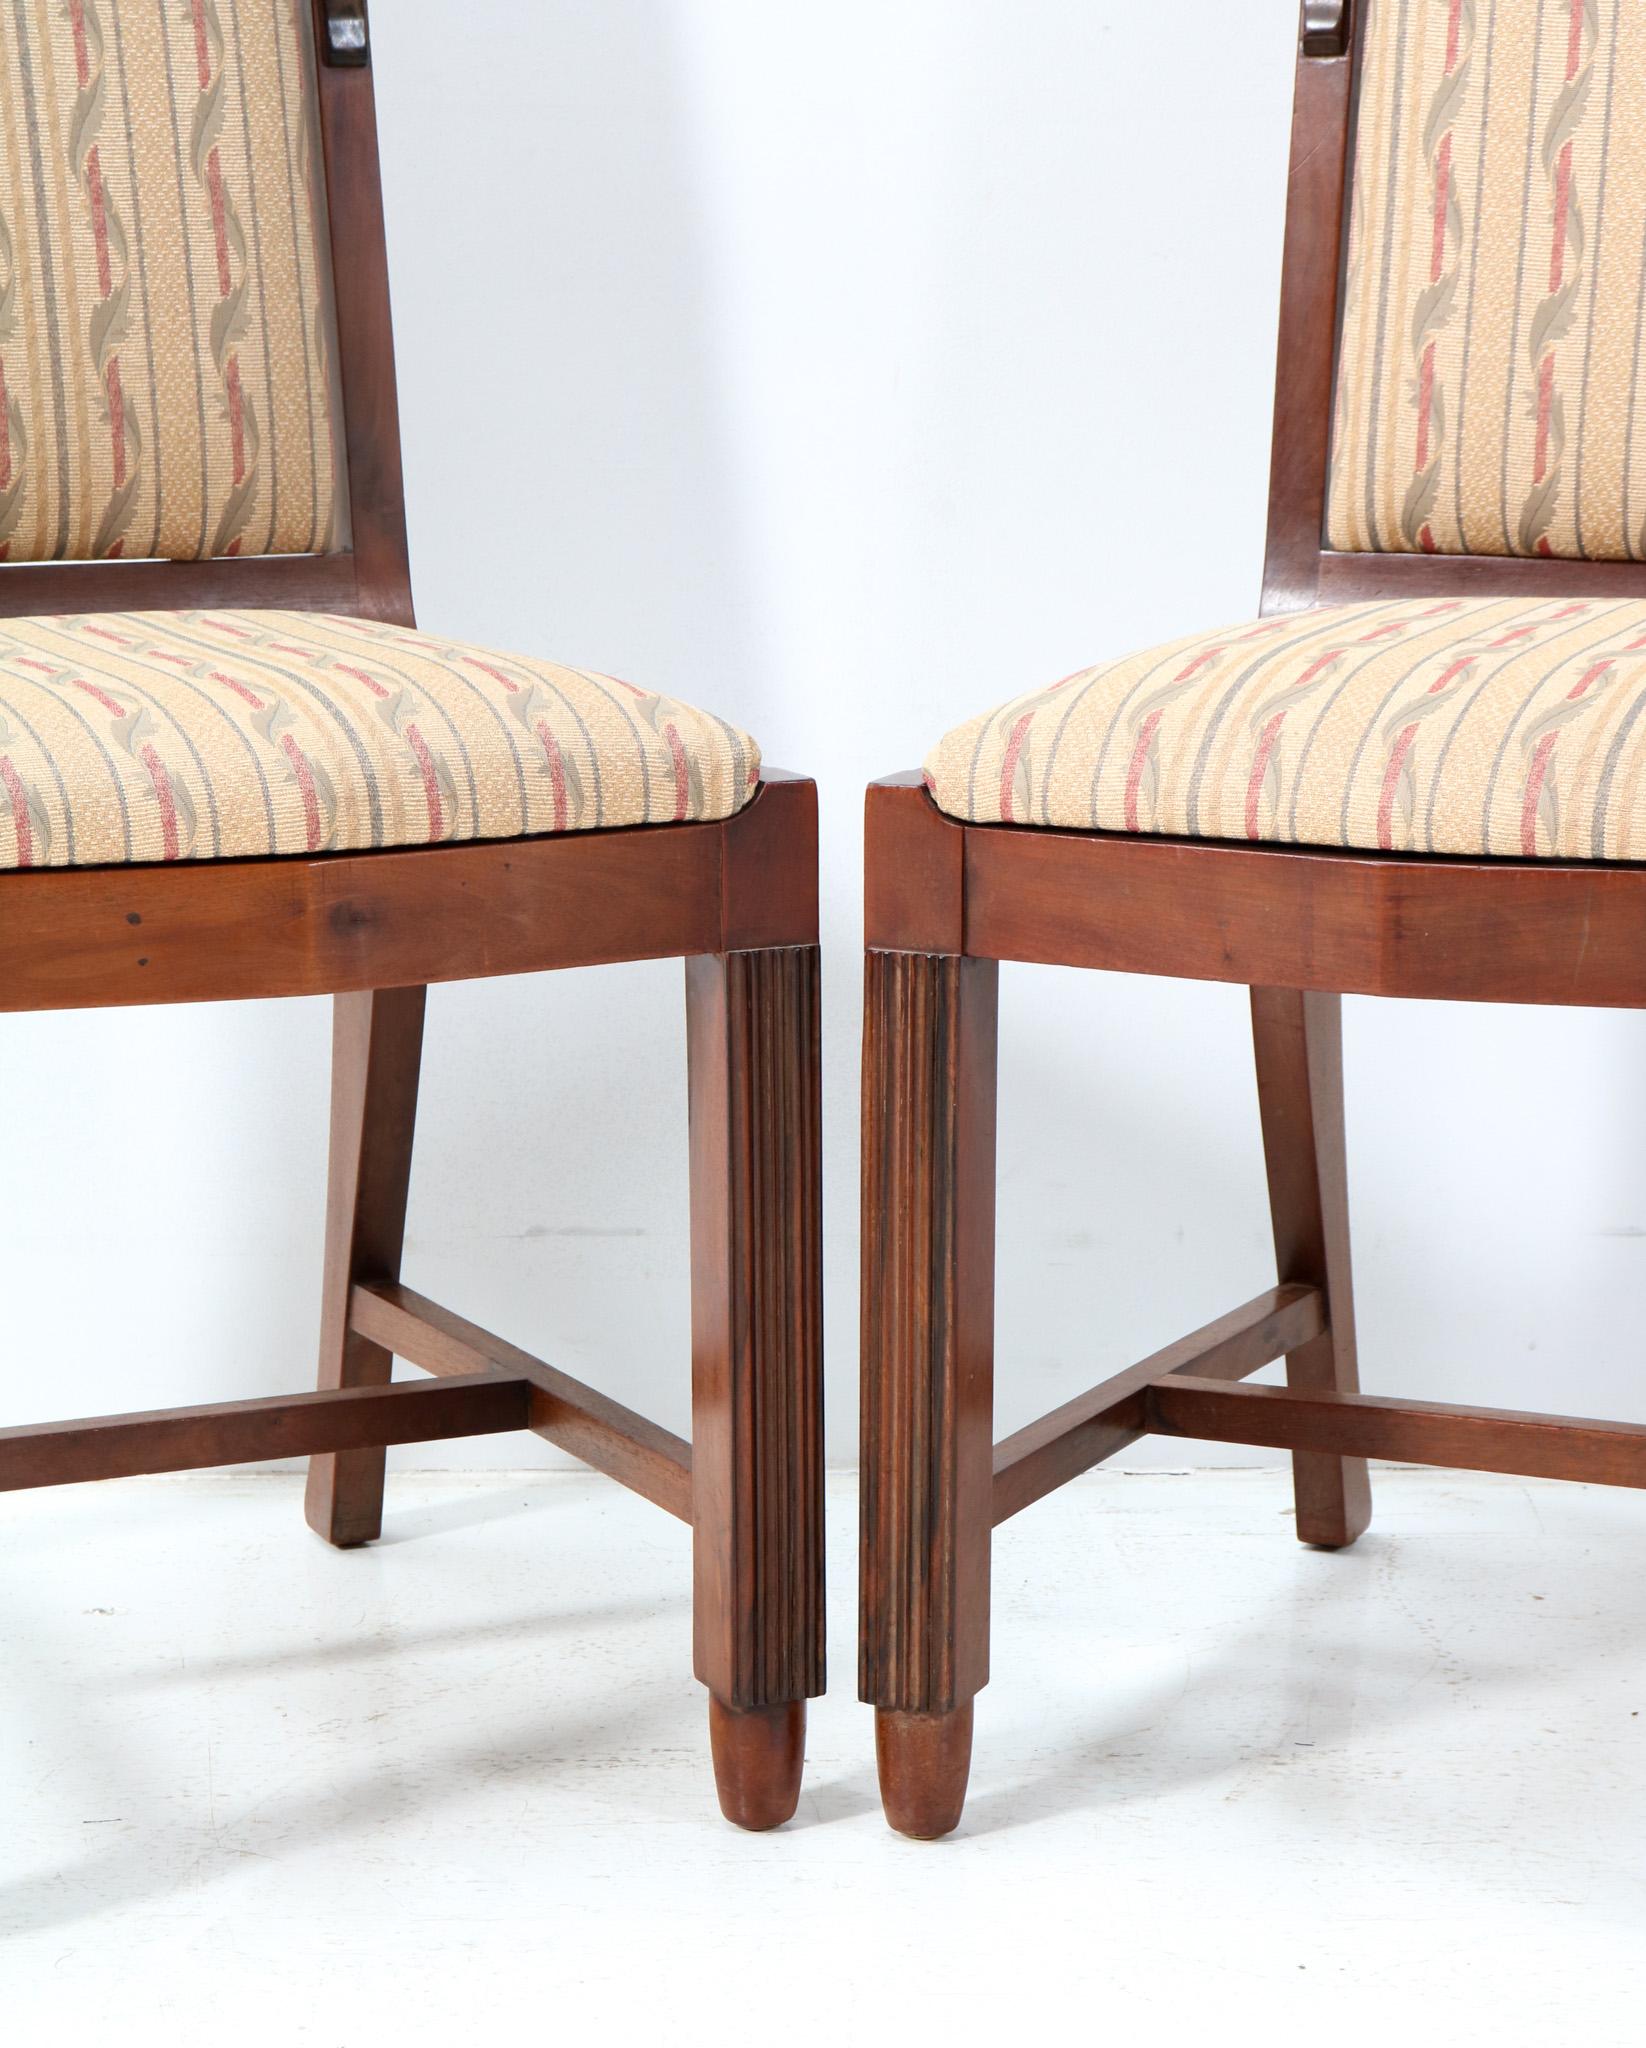 Four Walnut Art Deco Amsterdamse School Dining Room Chairs by Fa. Drilling, 1924 3